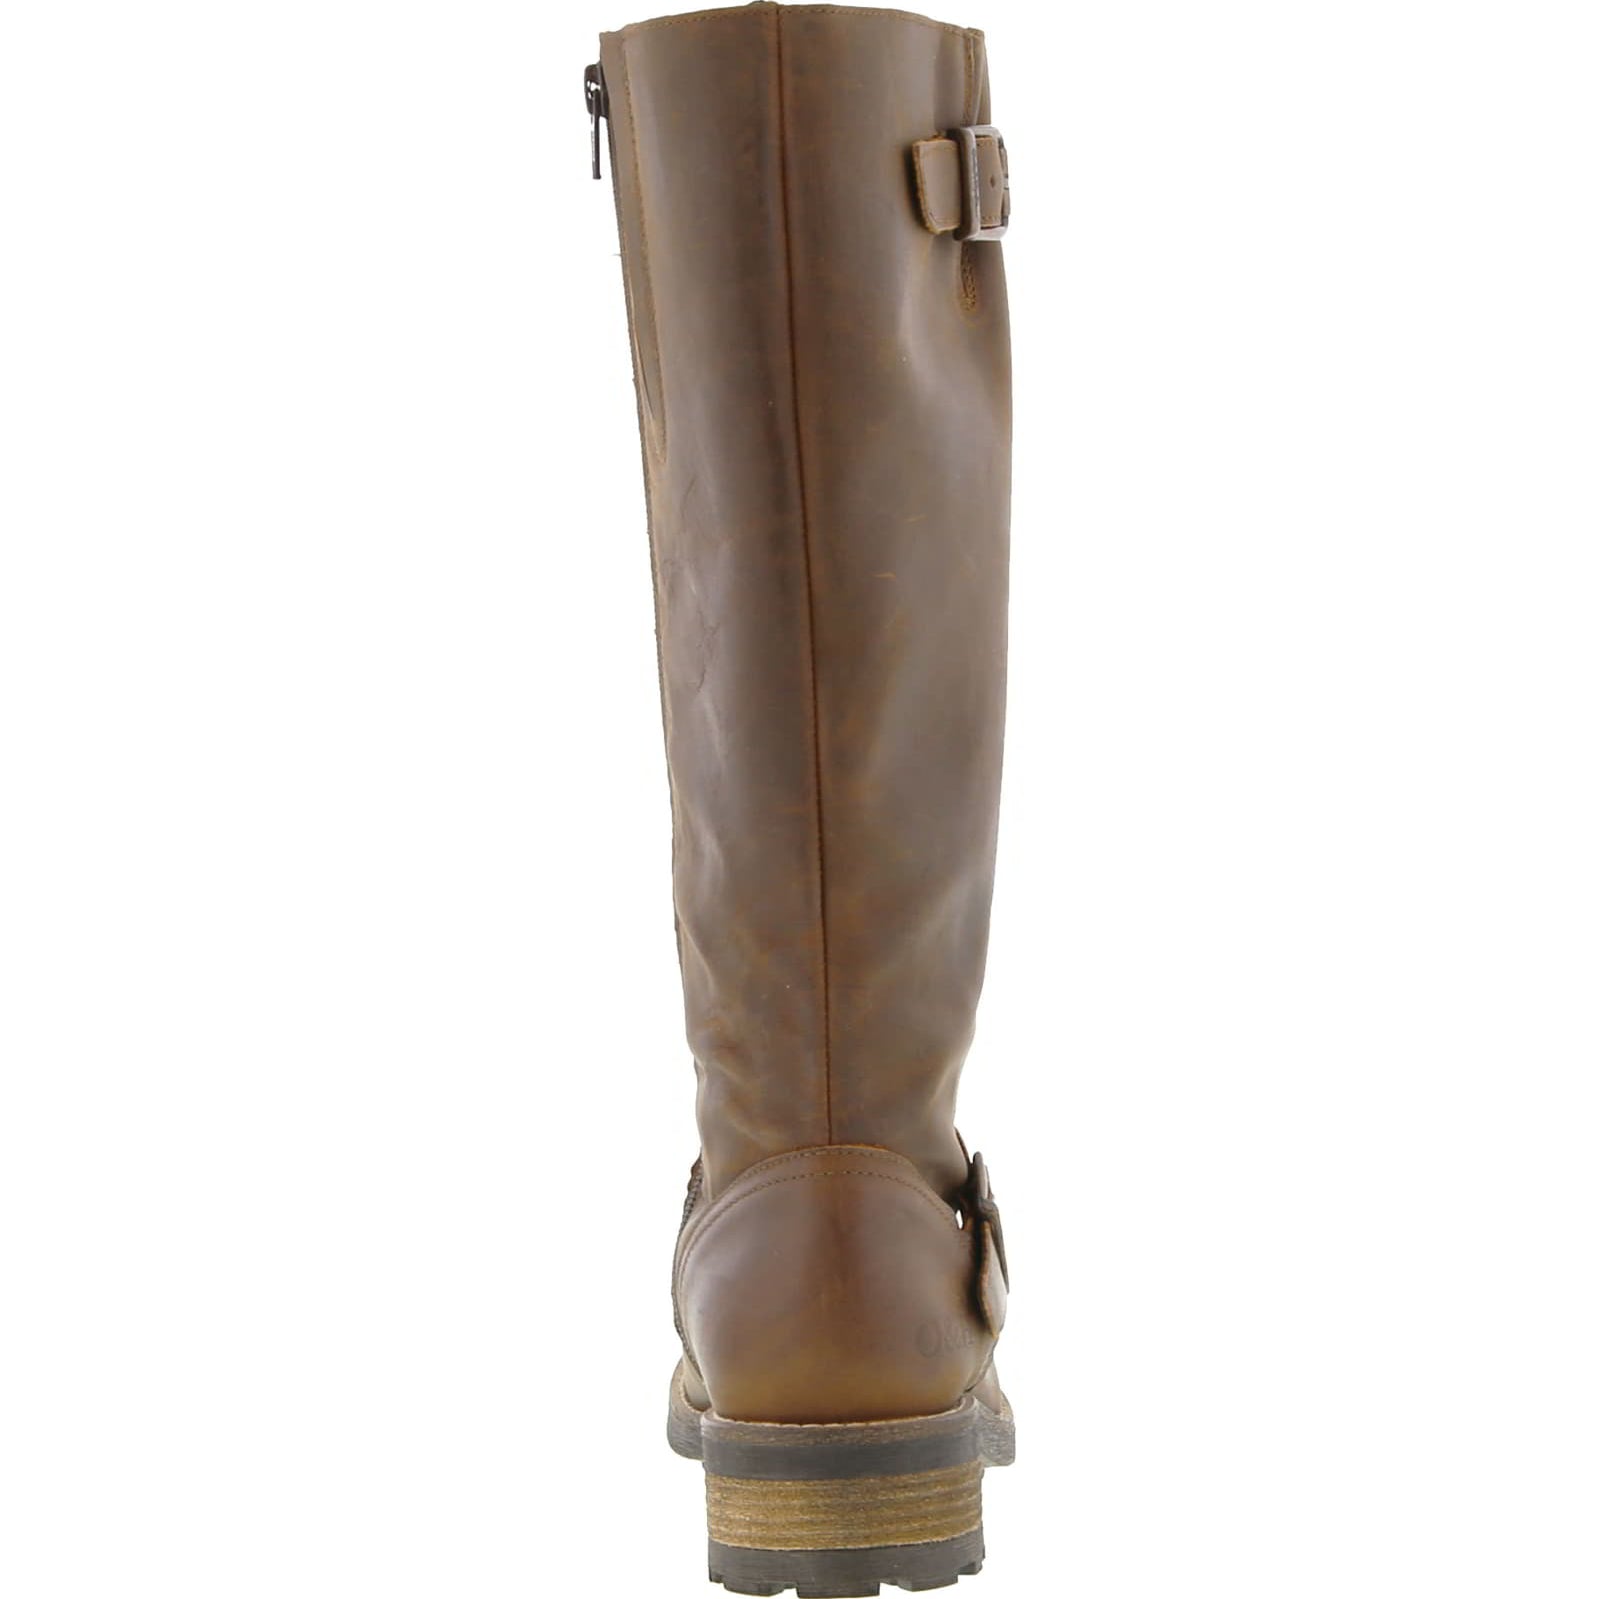 Womens Bridge Tall Country Boots - Brown